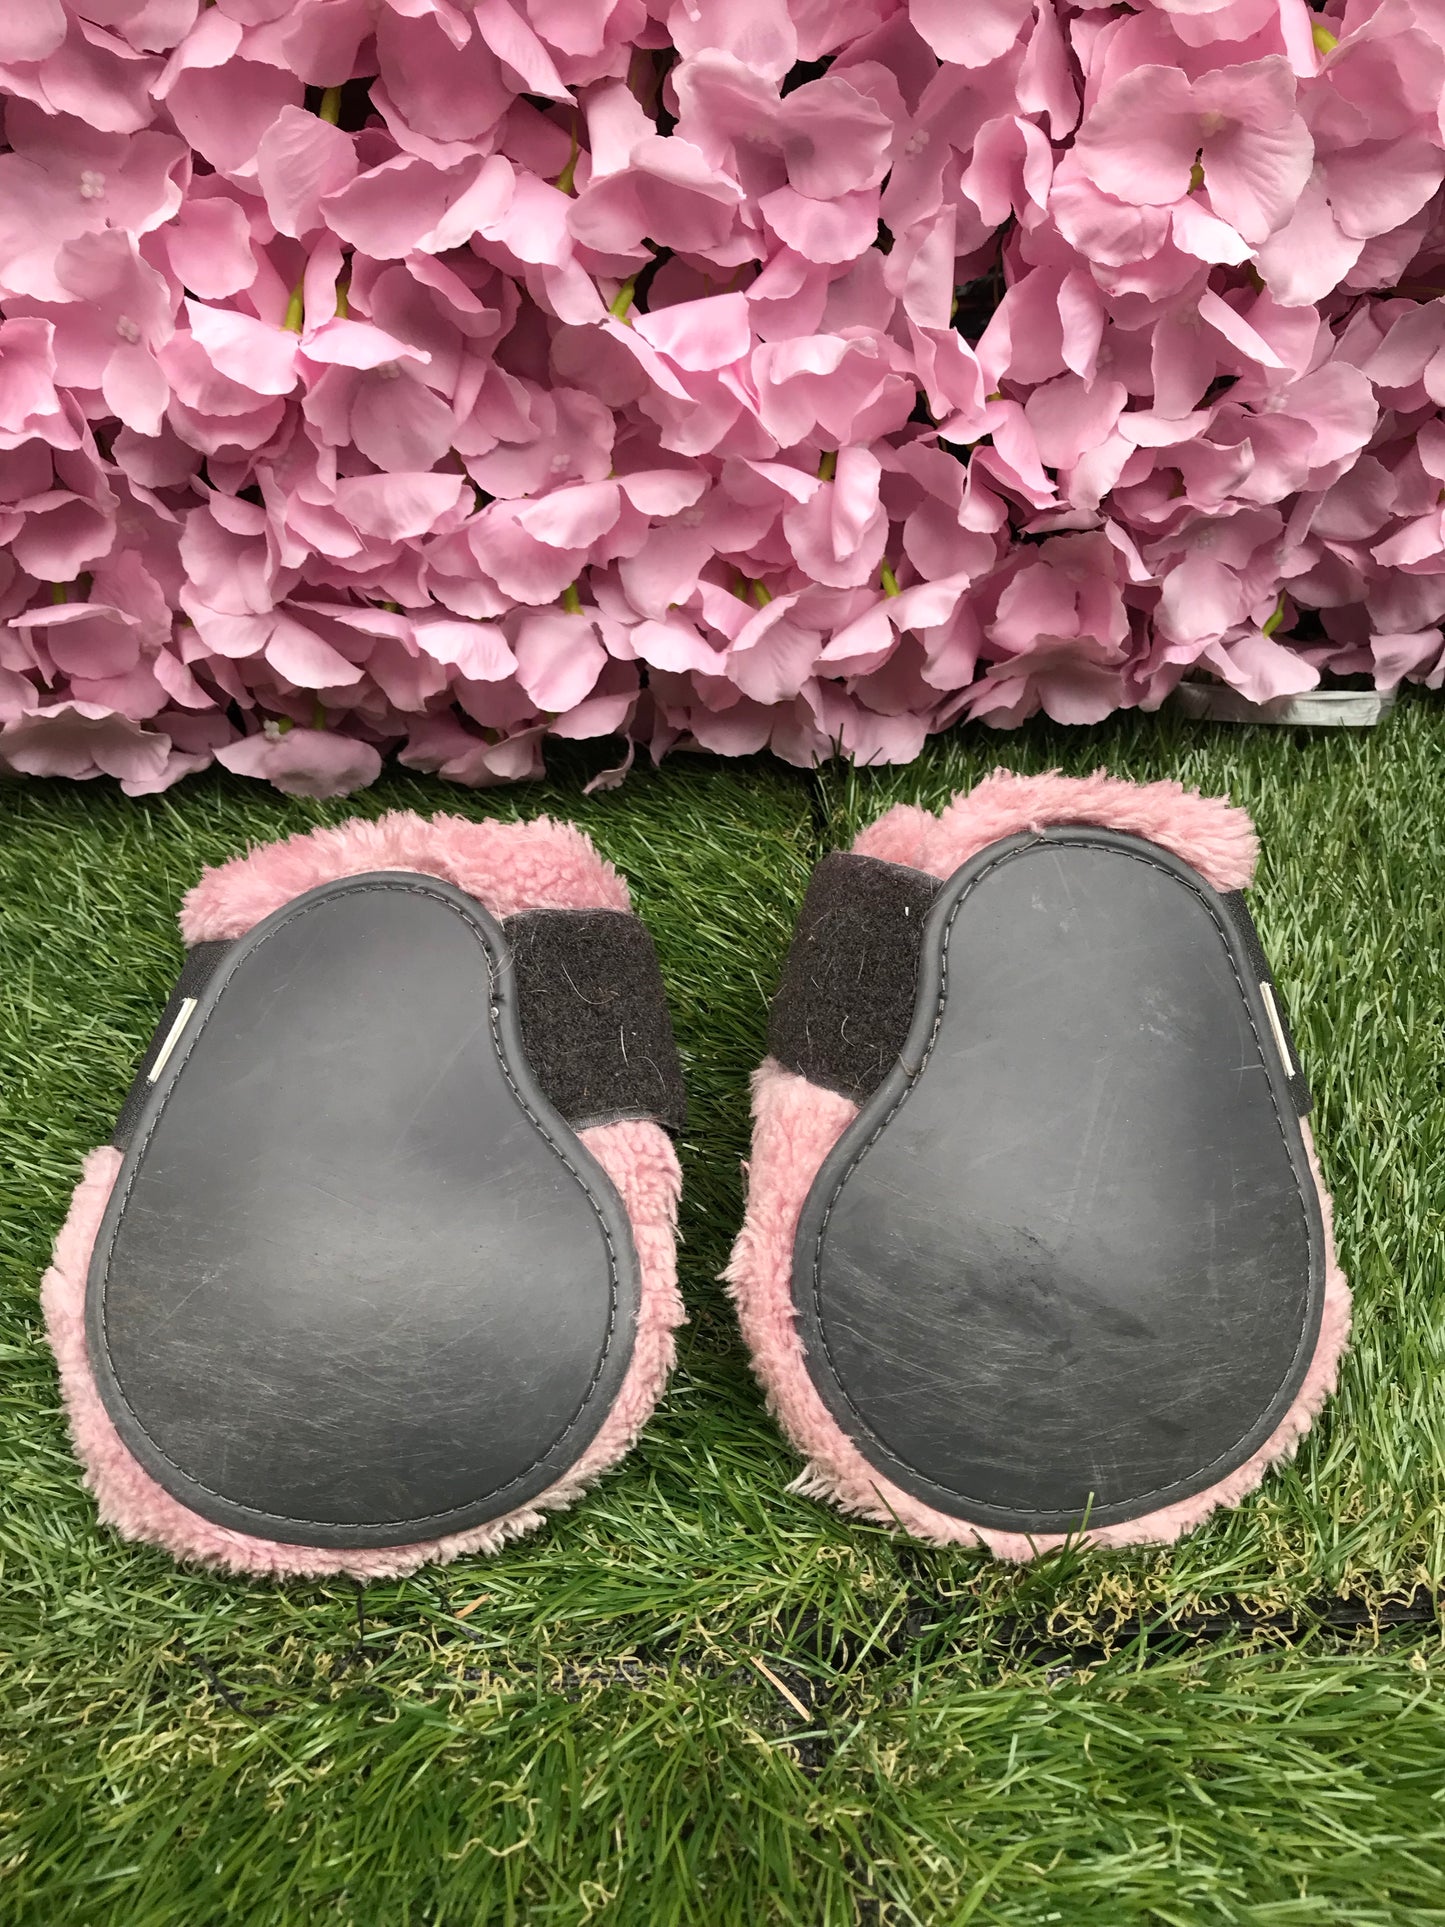 Norton cob size fetlock boots pink and grey comfort a FREE POSTAGE